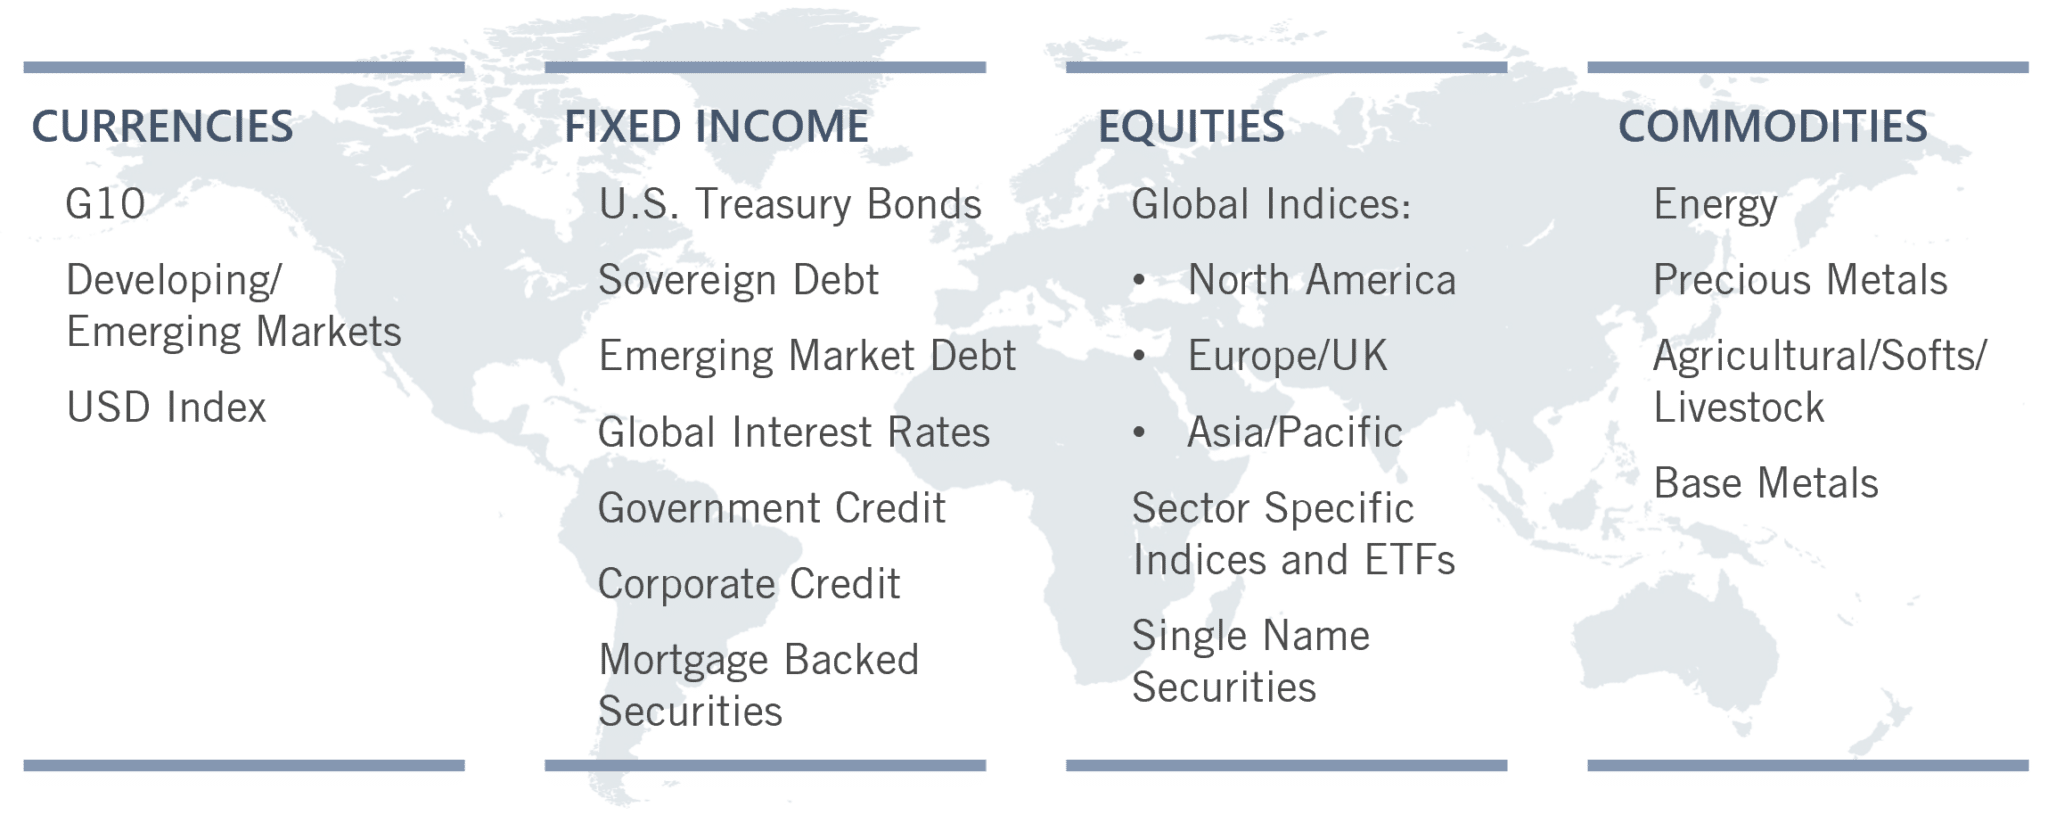 Markets Traded: Currencies, Fixed Income, Equities, Commodities